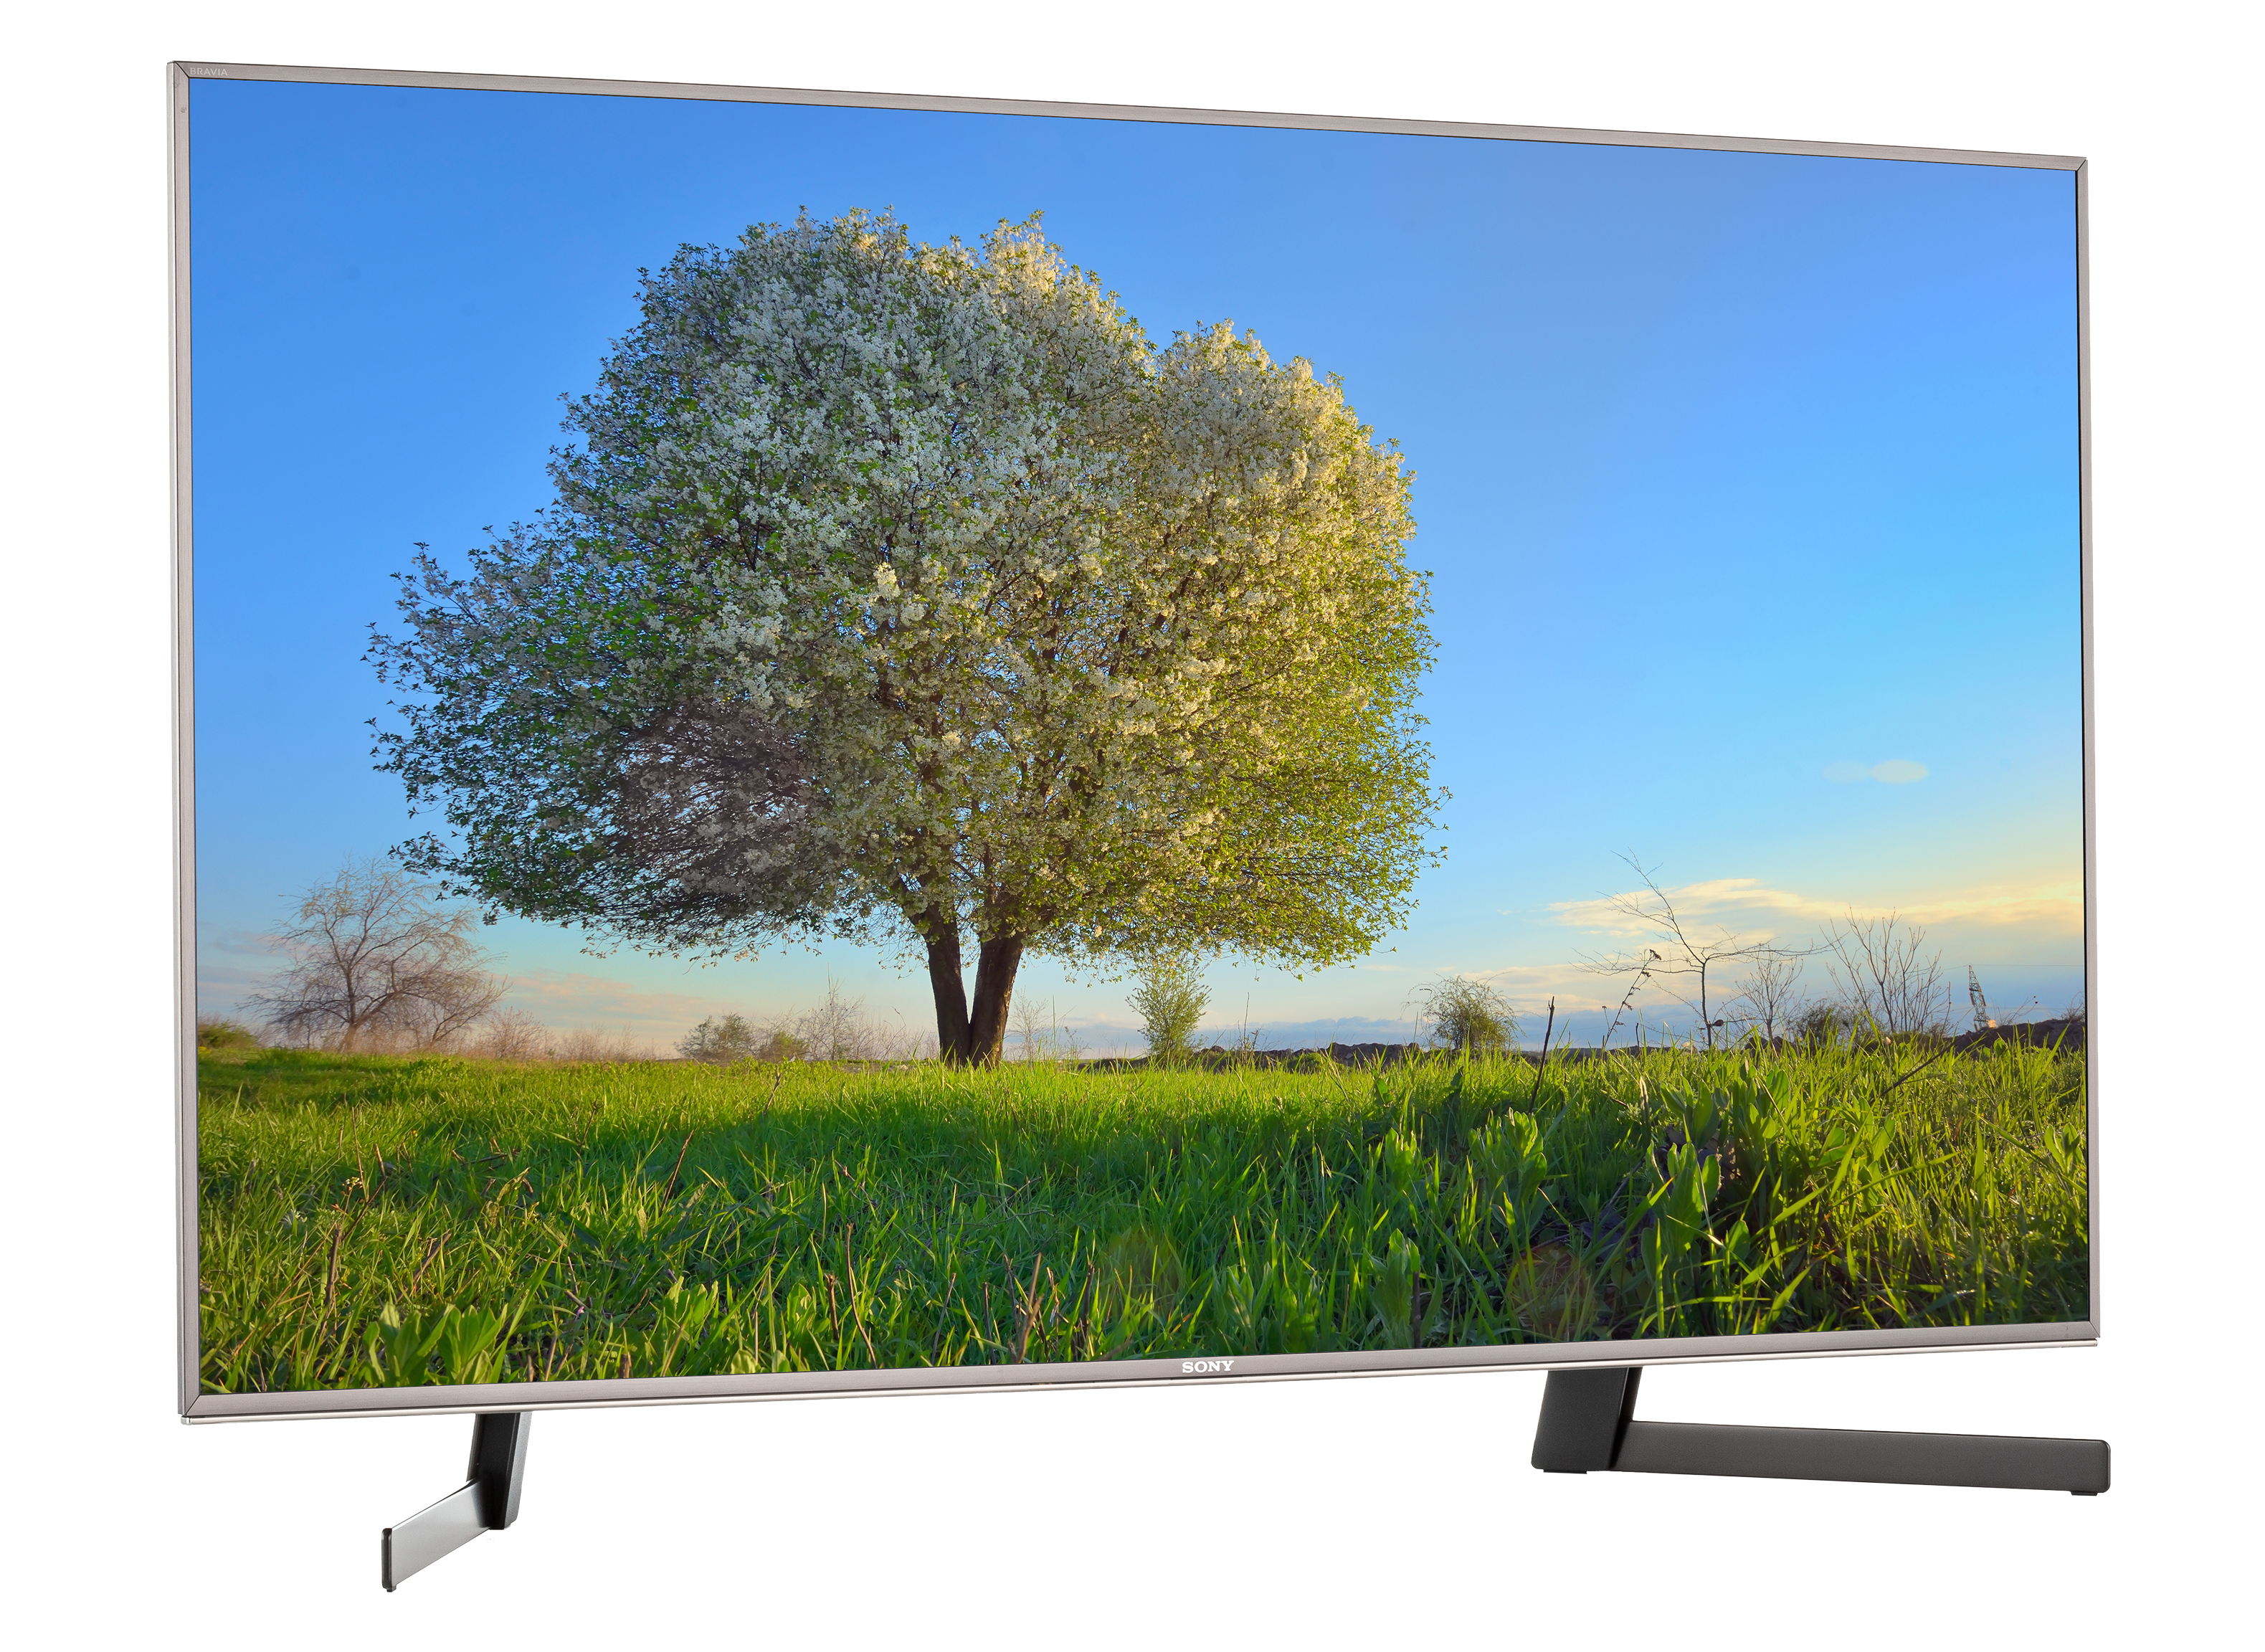 IKRON 1920x1080 32 inch Full HD Smart LED TV at Rs 8500/piece in